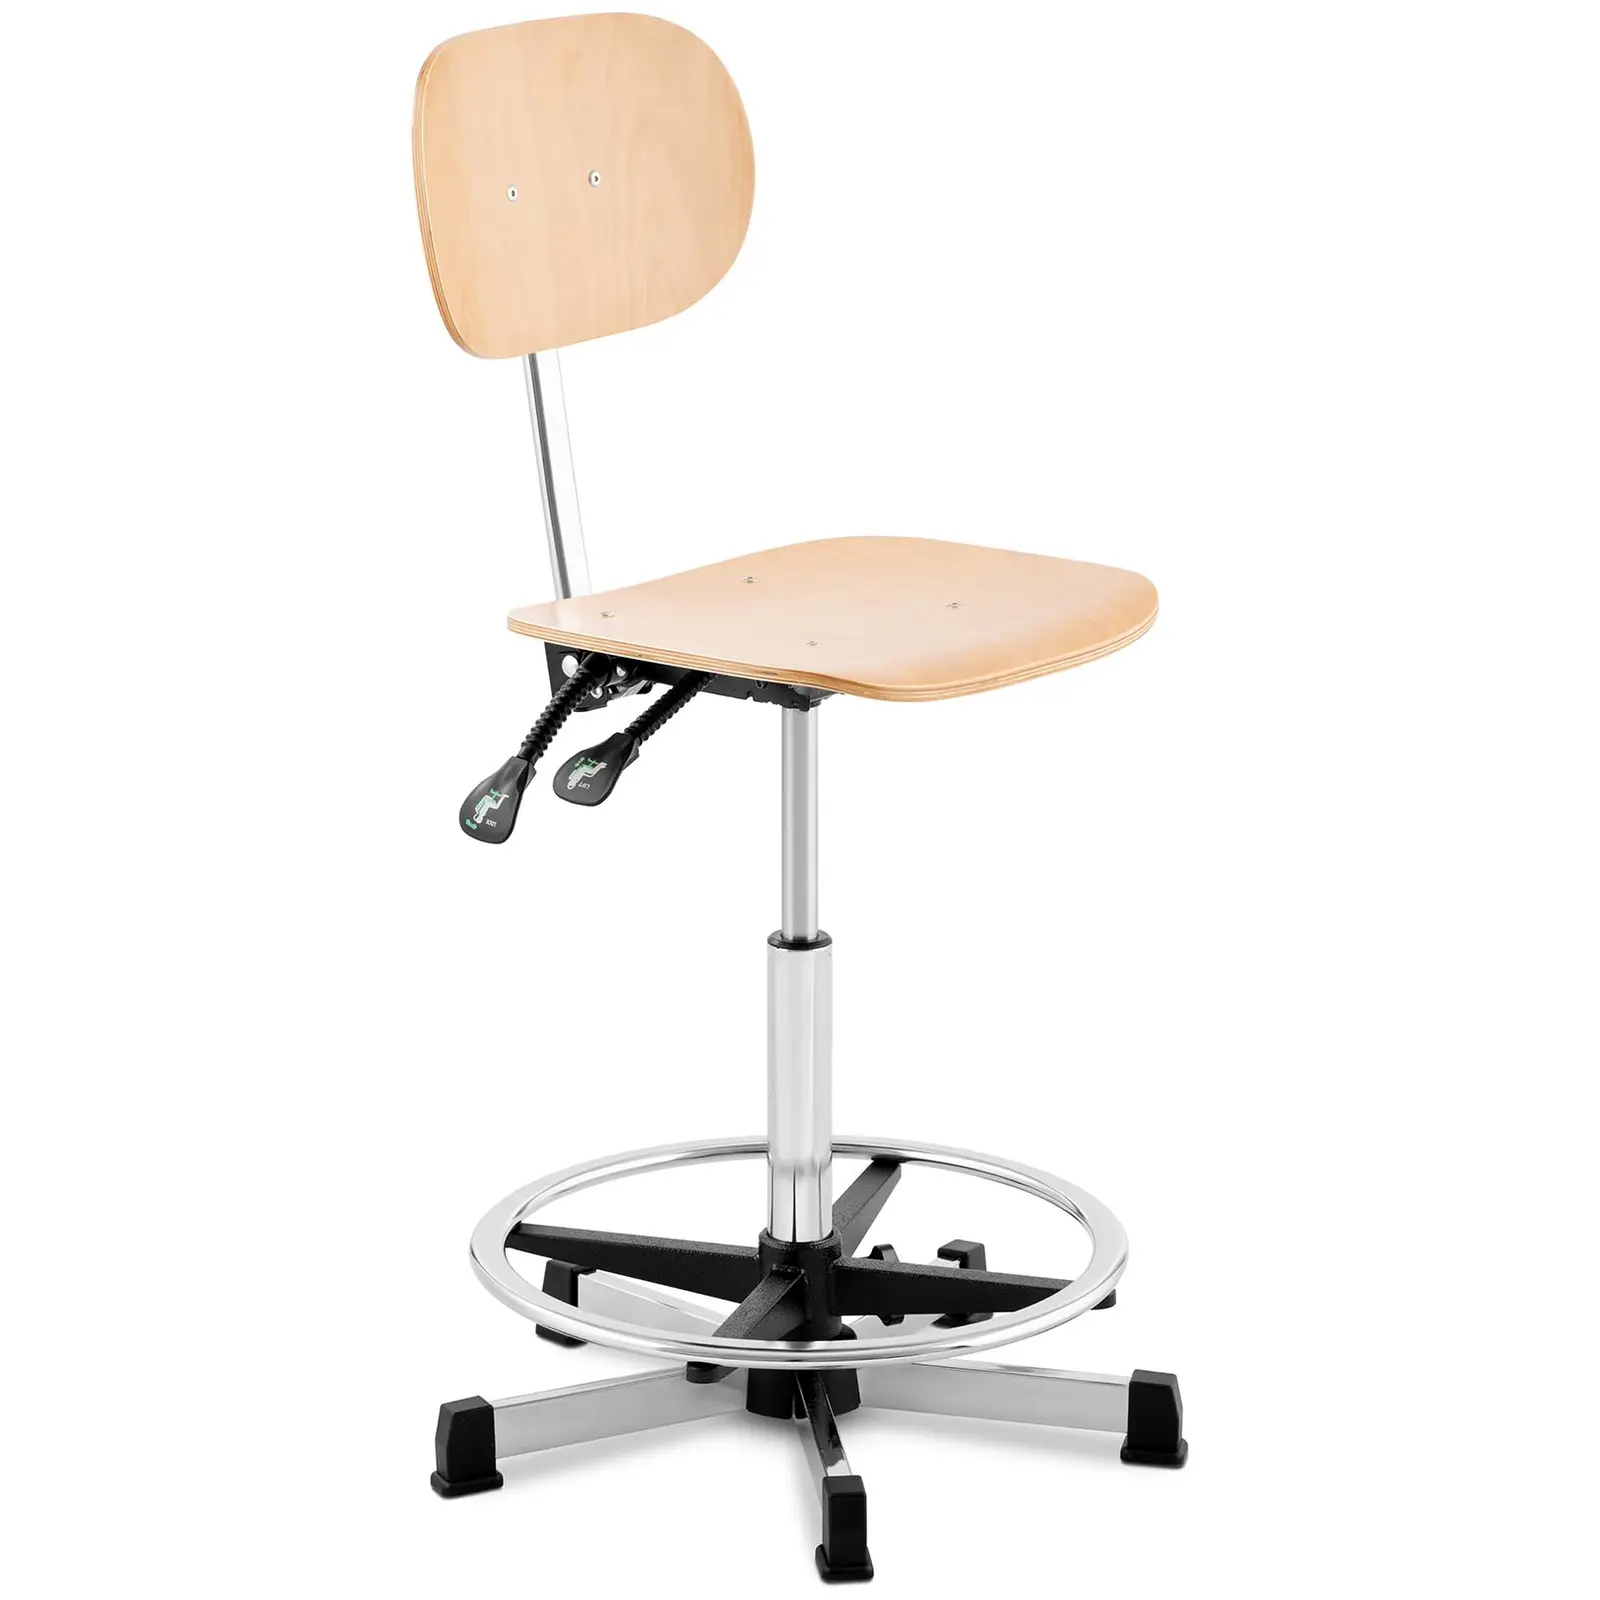 Workshop chair - 120 kg - Chrome, Wood - foot ring - height adjustable from 550 - 800 mm